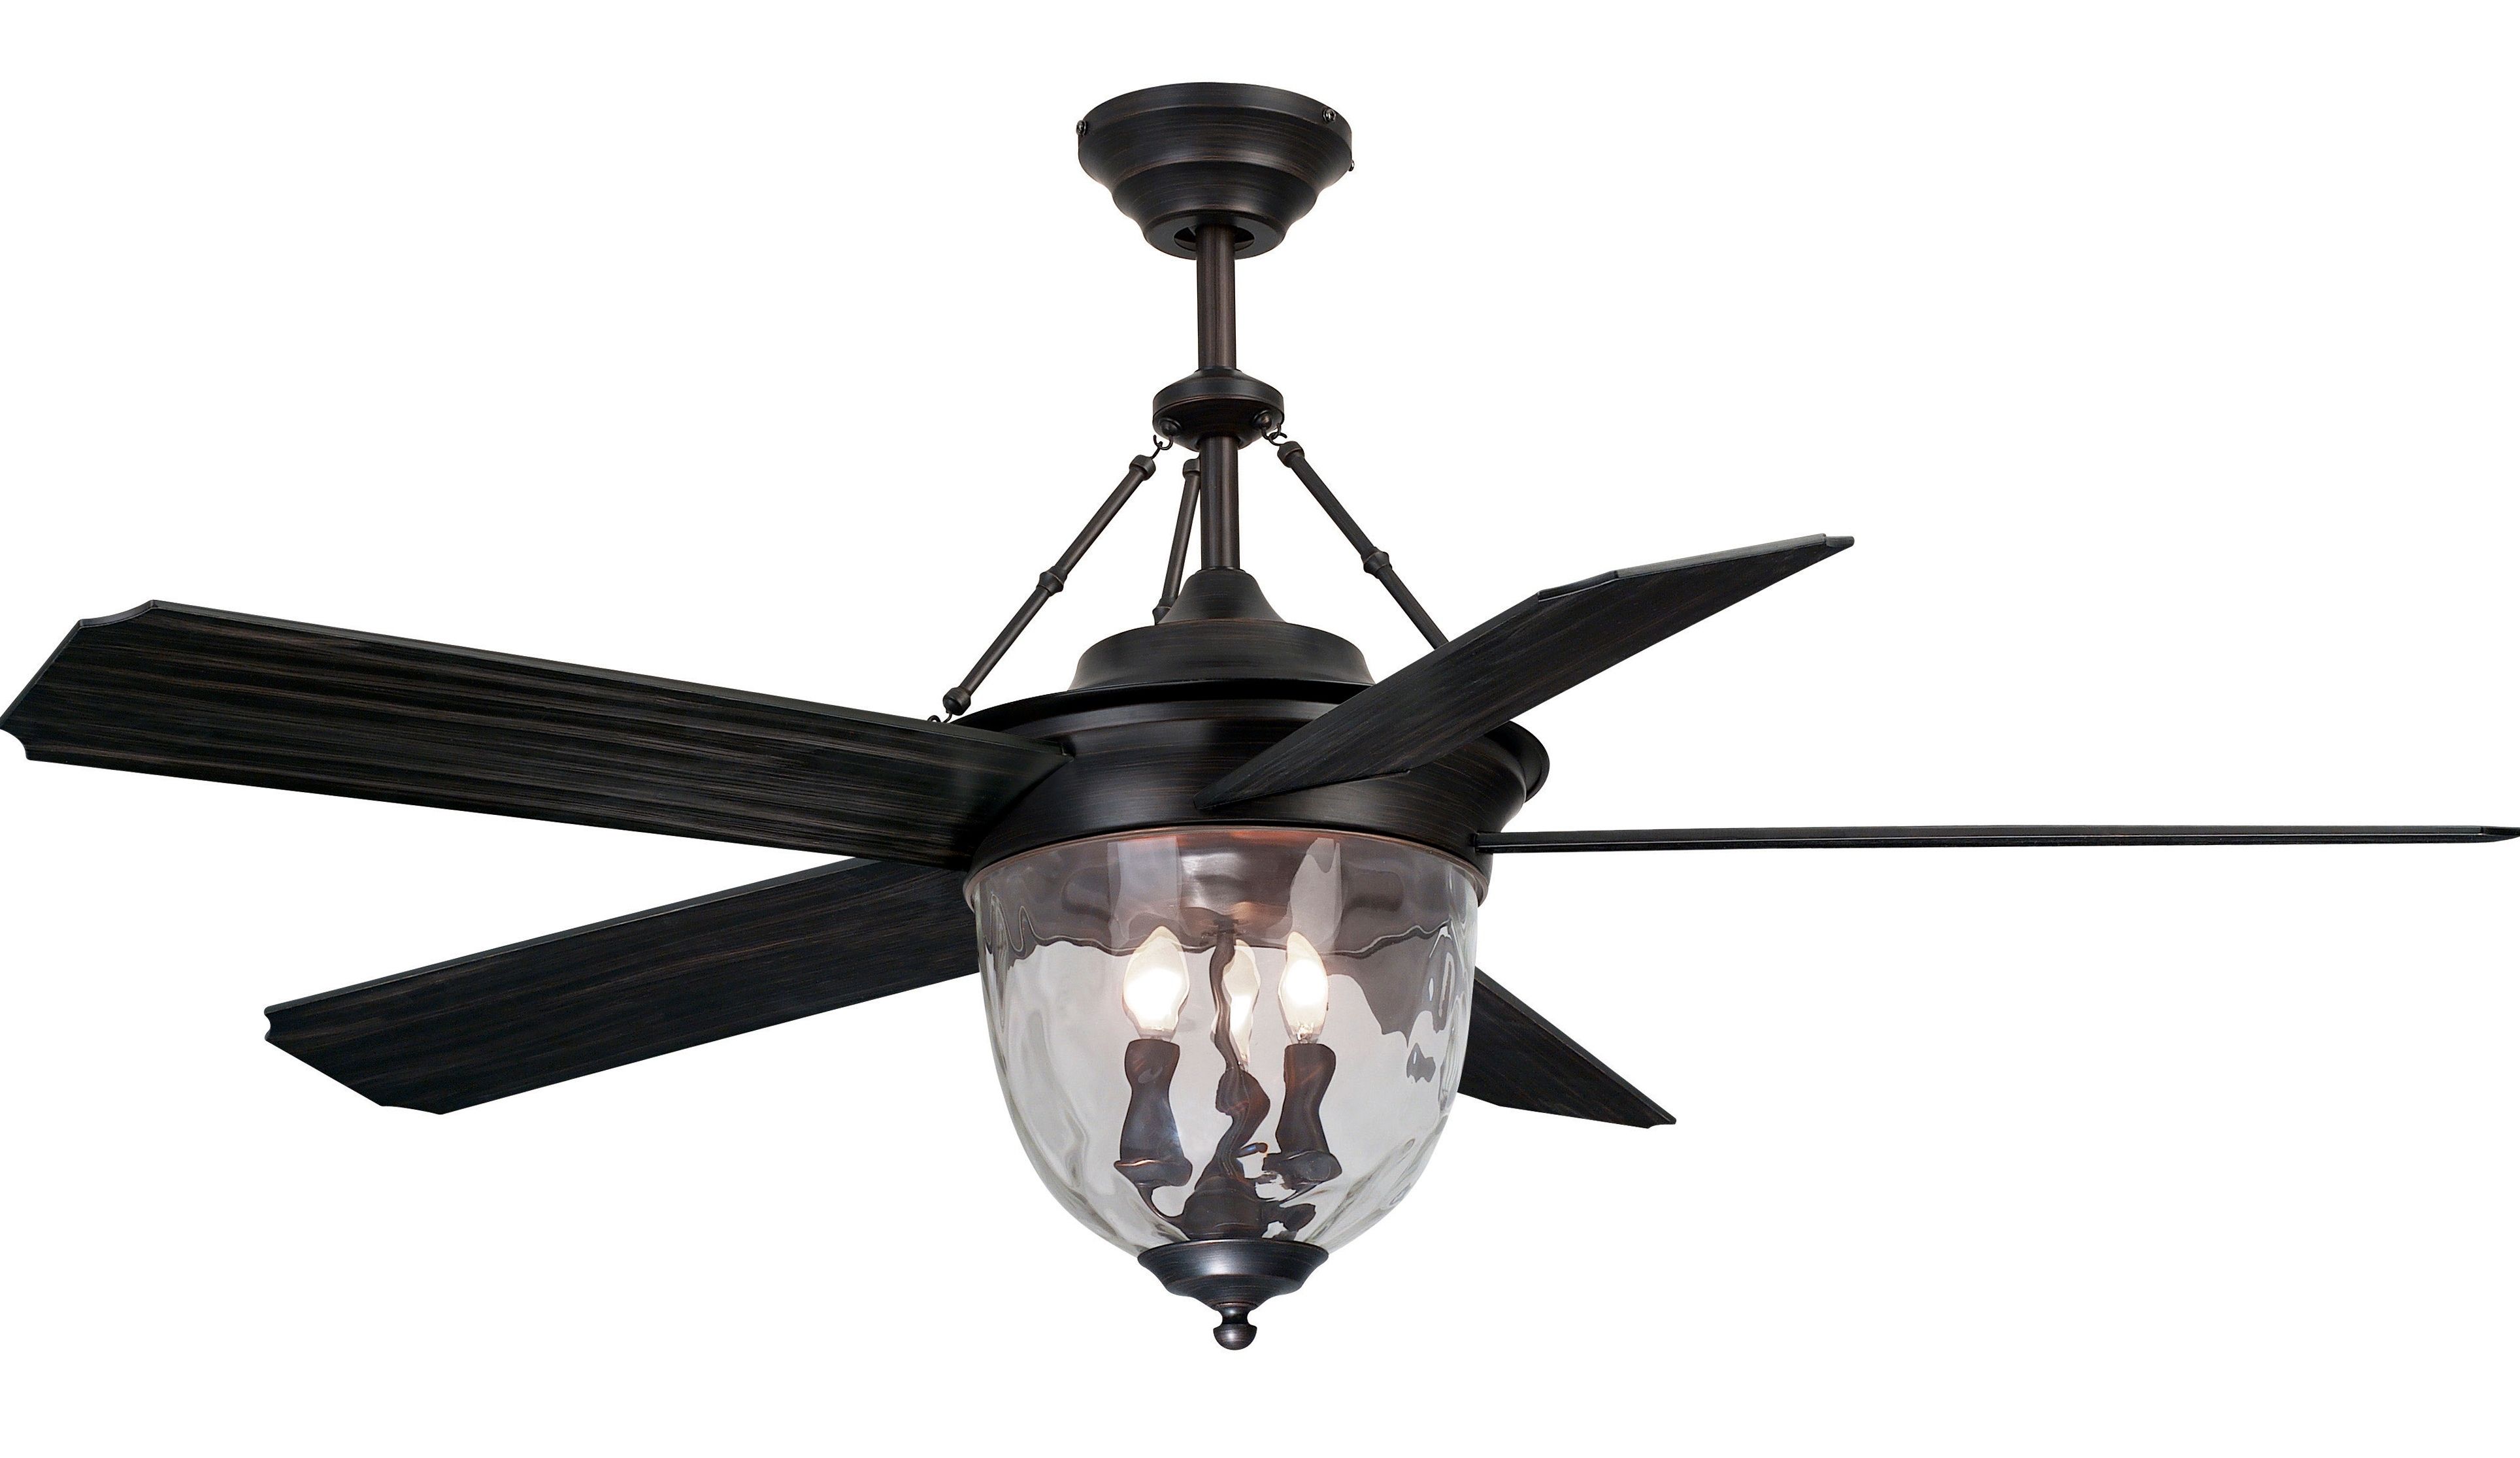 Lowes Outdoor Ceiling Fans With Light Home Design Ideas Plus Fan Within Outdoor Ceiling Fans With Lights (View 12 of 15)